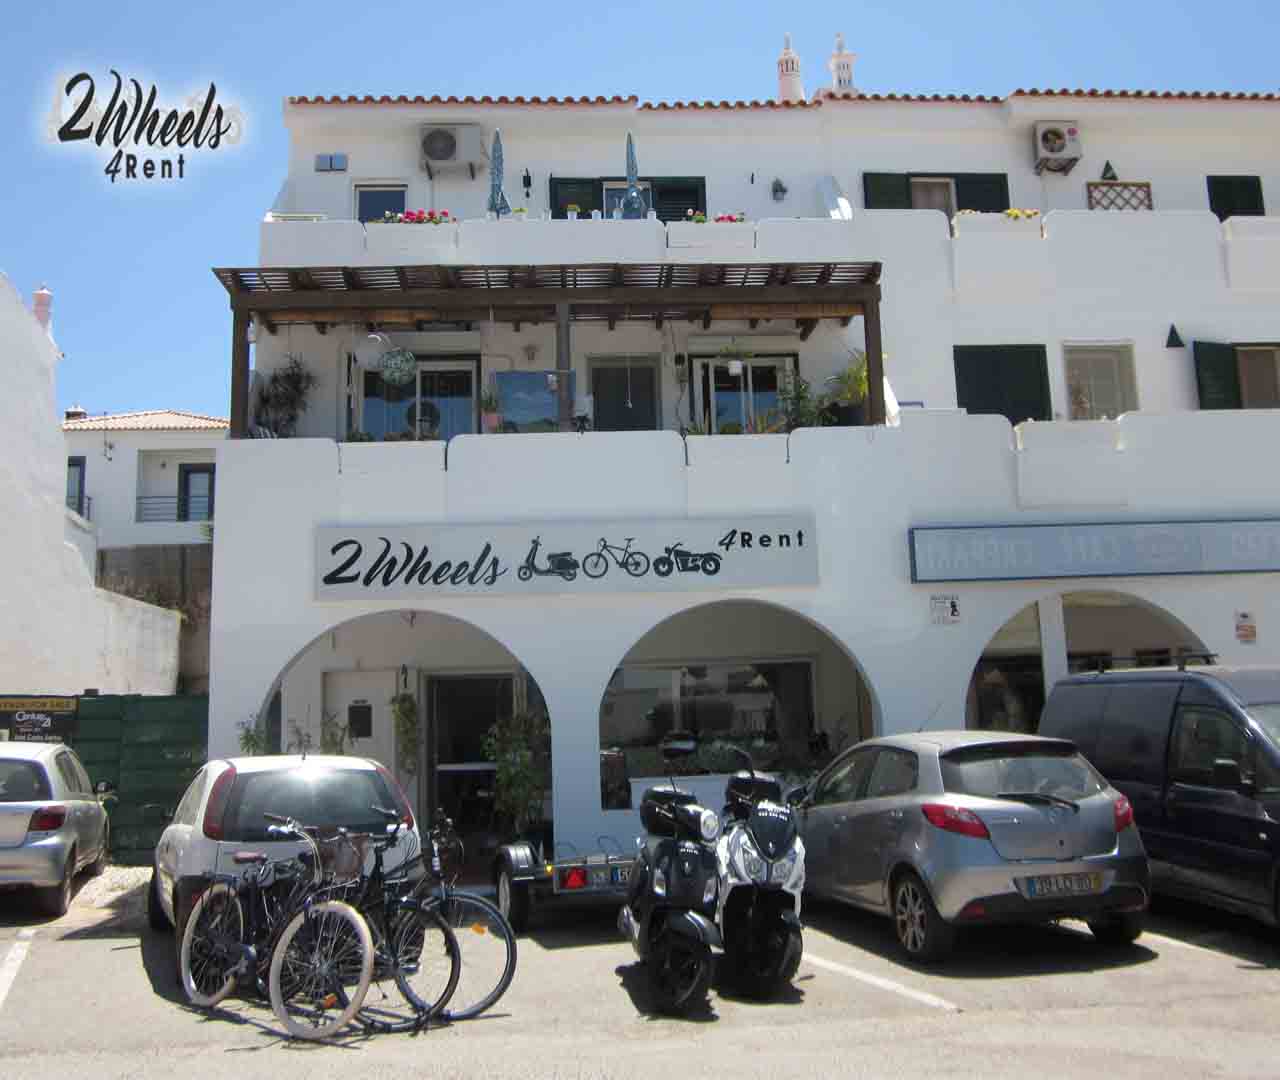 location scooter faro, location scooter algarve, louer scooter faro, louer scooter algarve, location scooter portugal